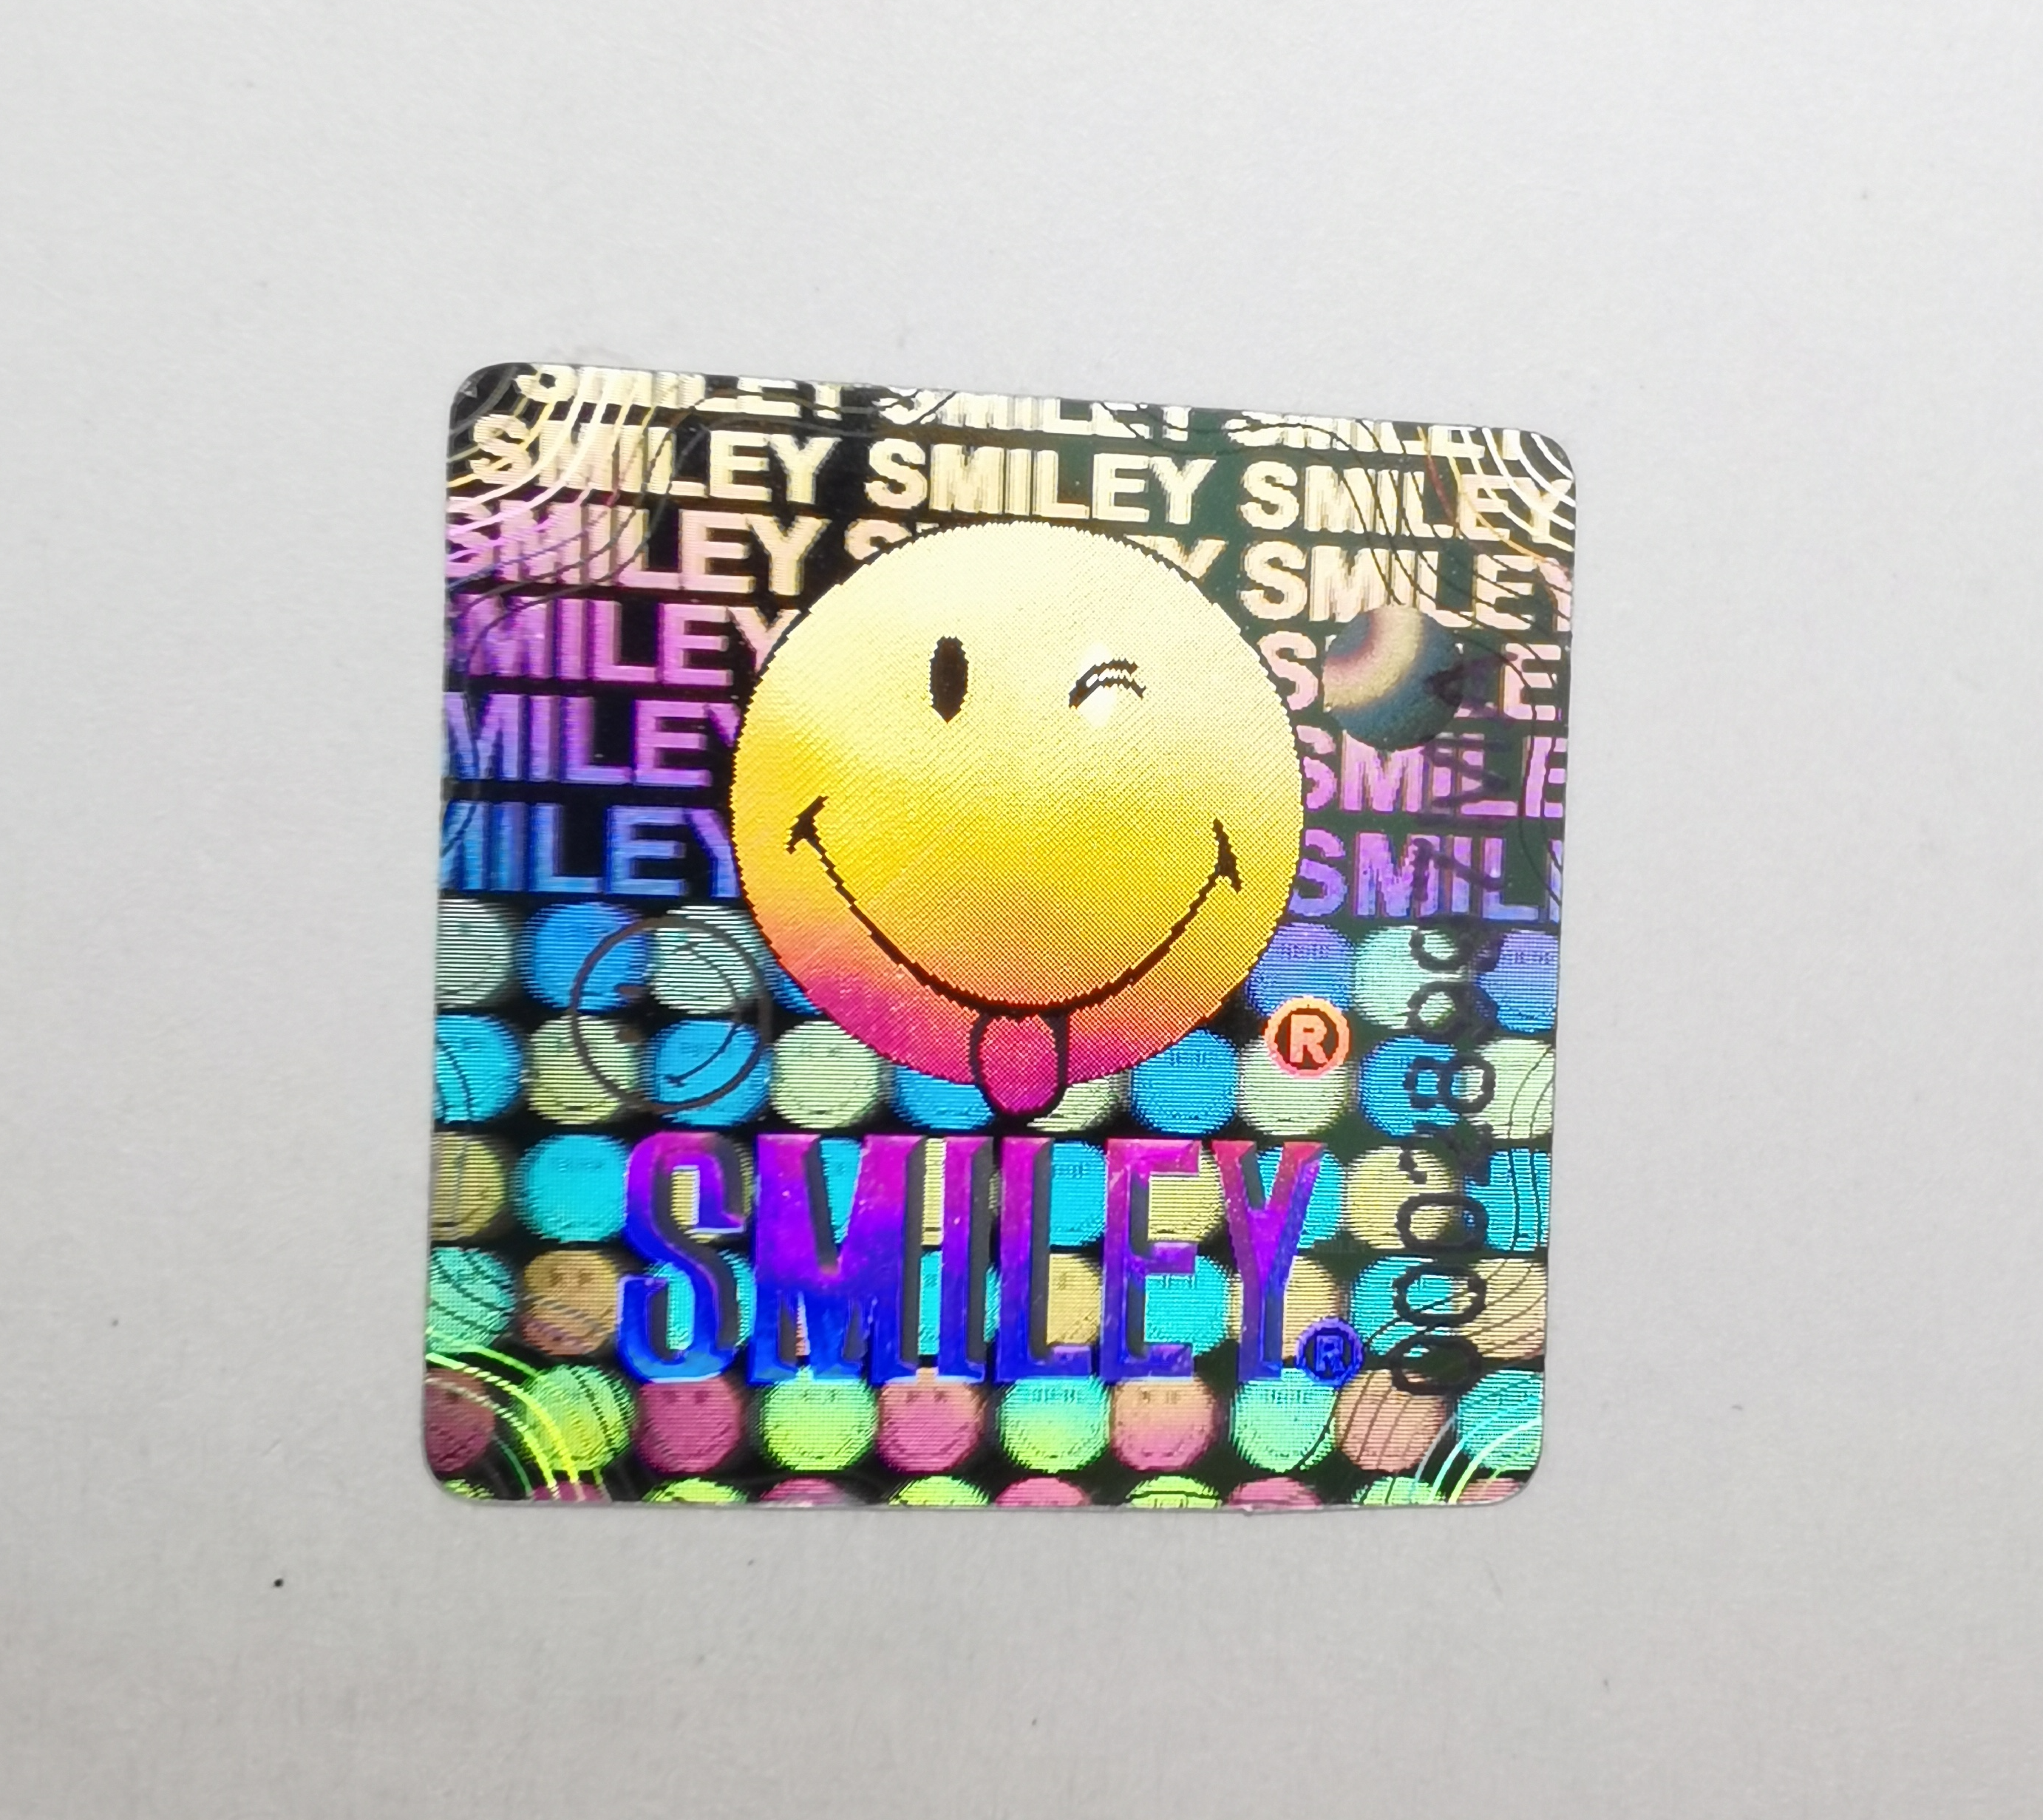 Smiley face holographic sticker serial number